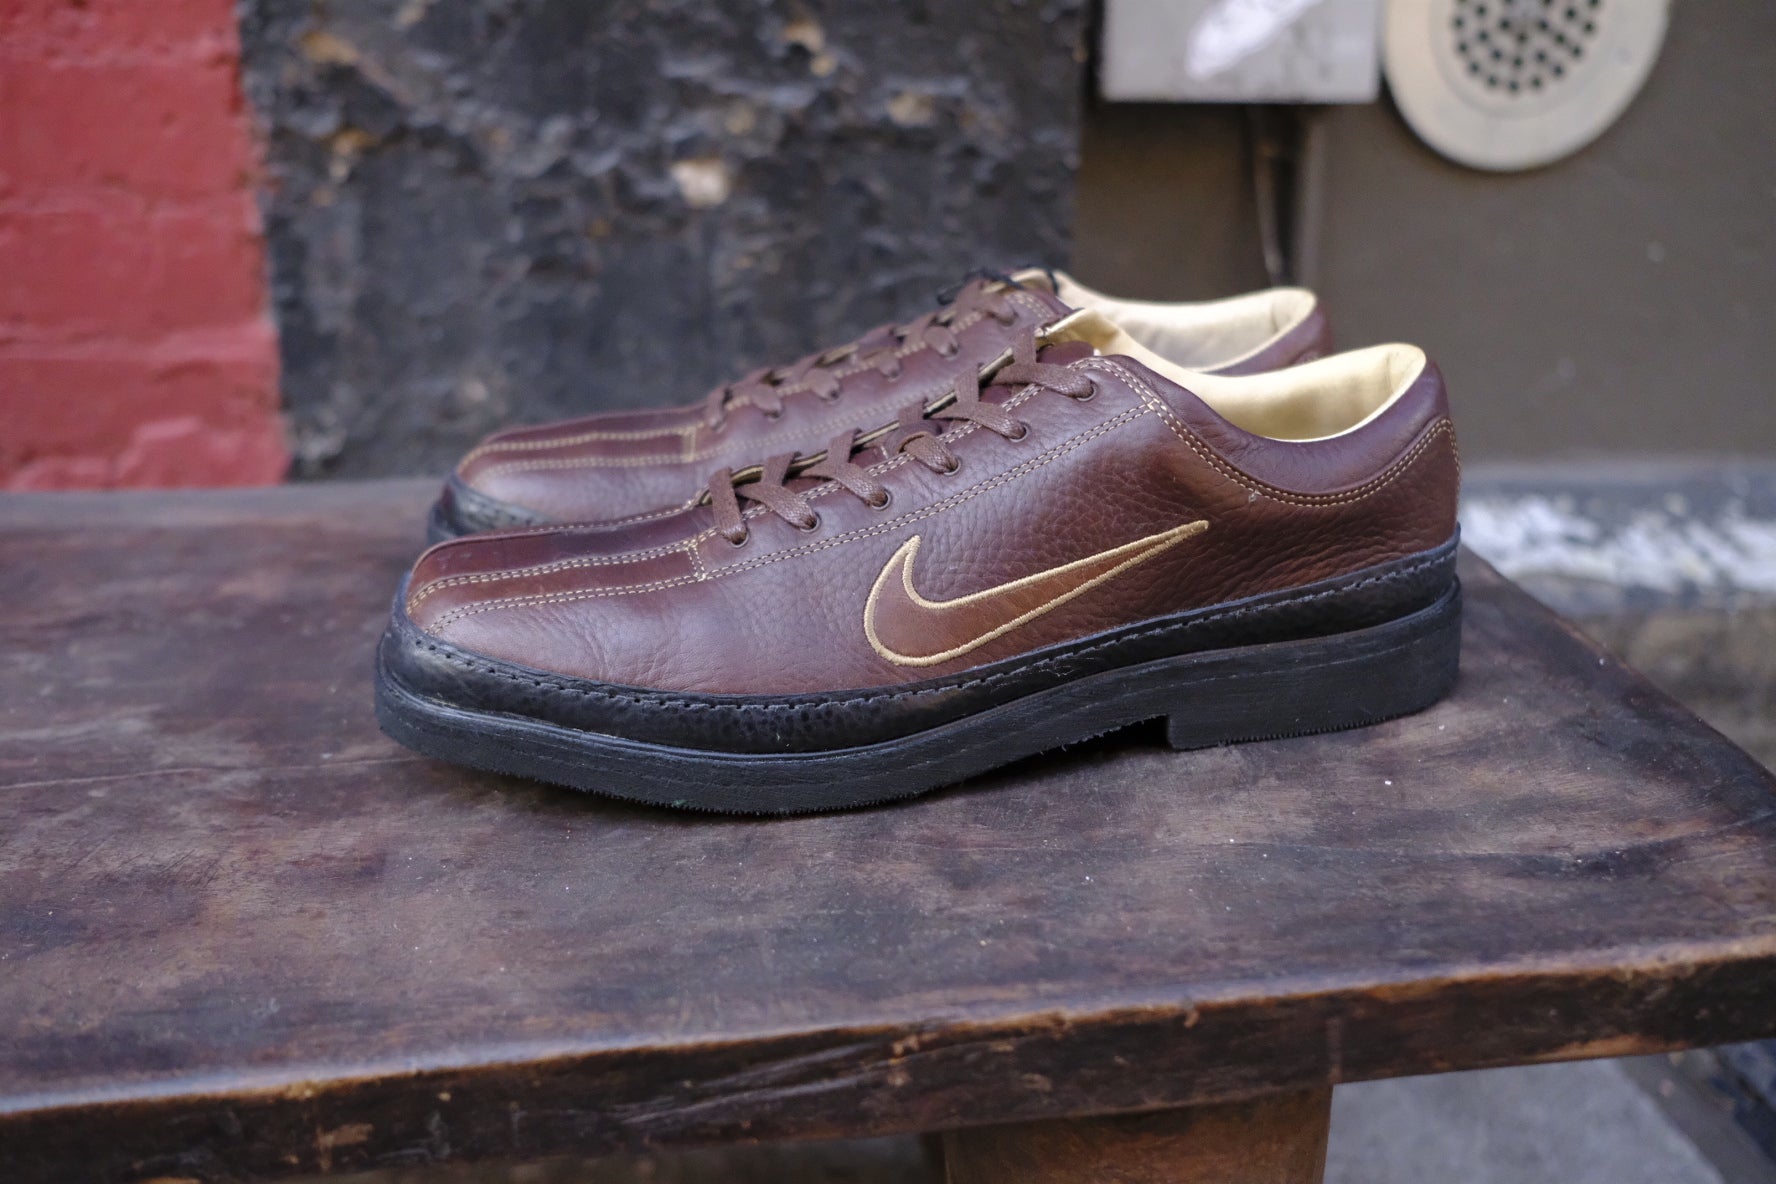 reconstructed 2004 nike golf shoe - m us 9